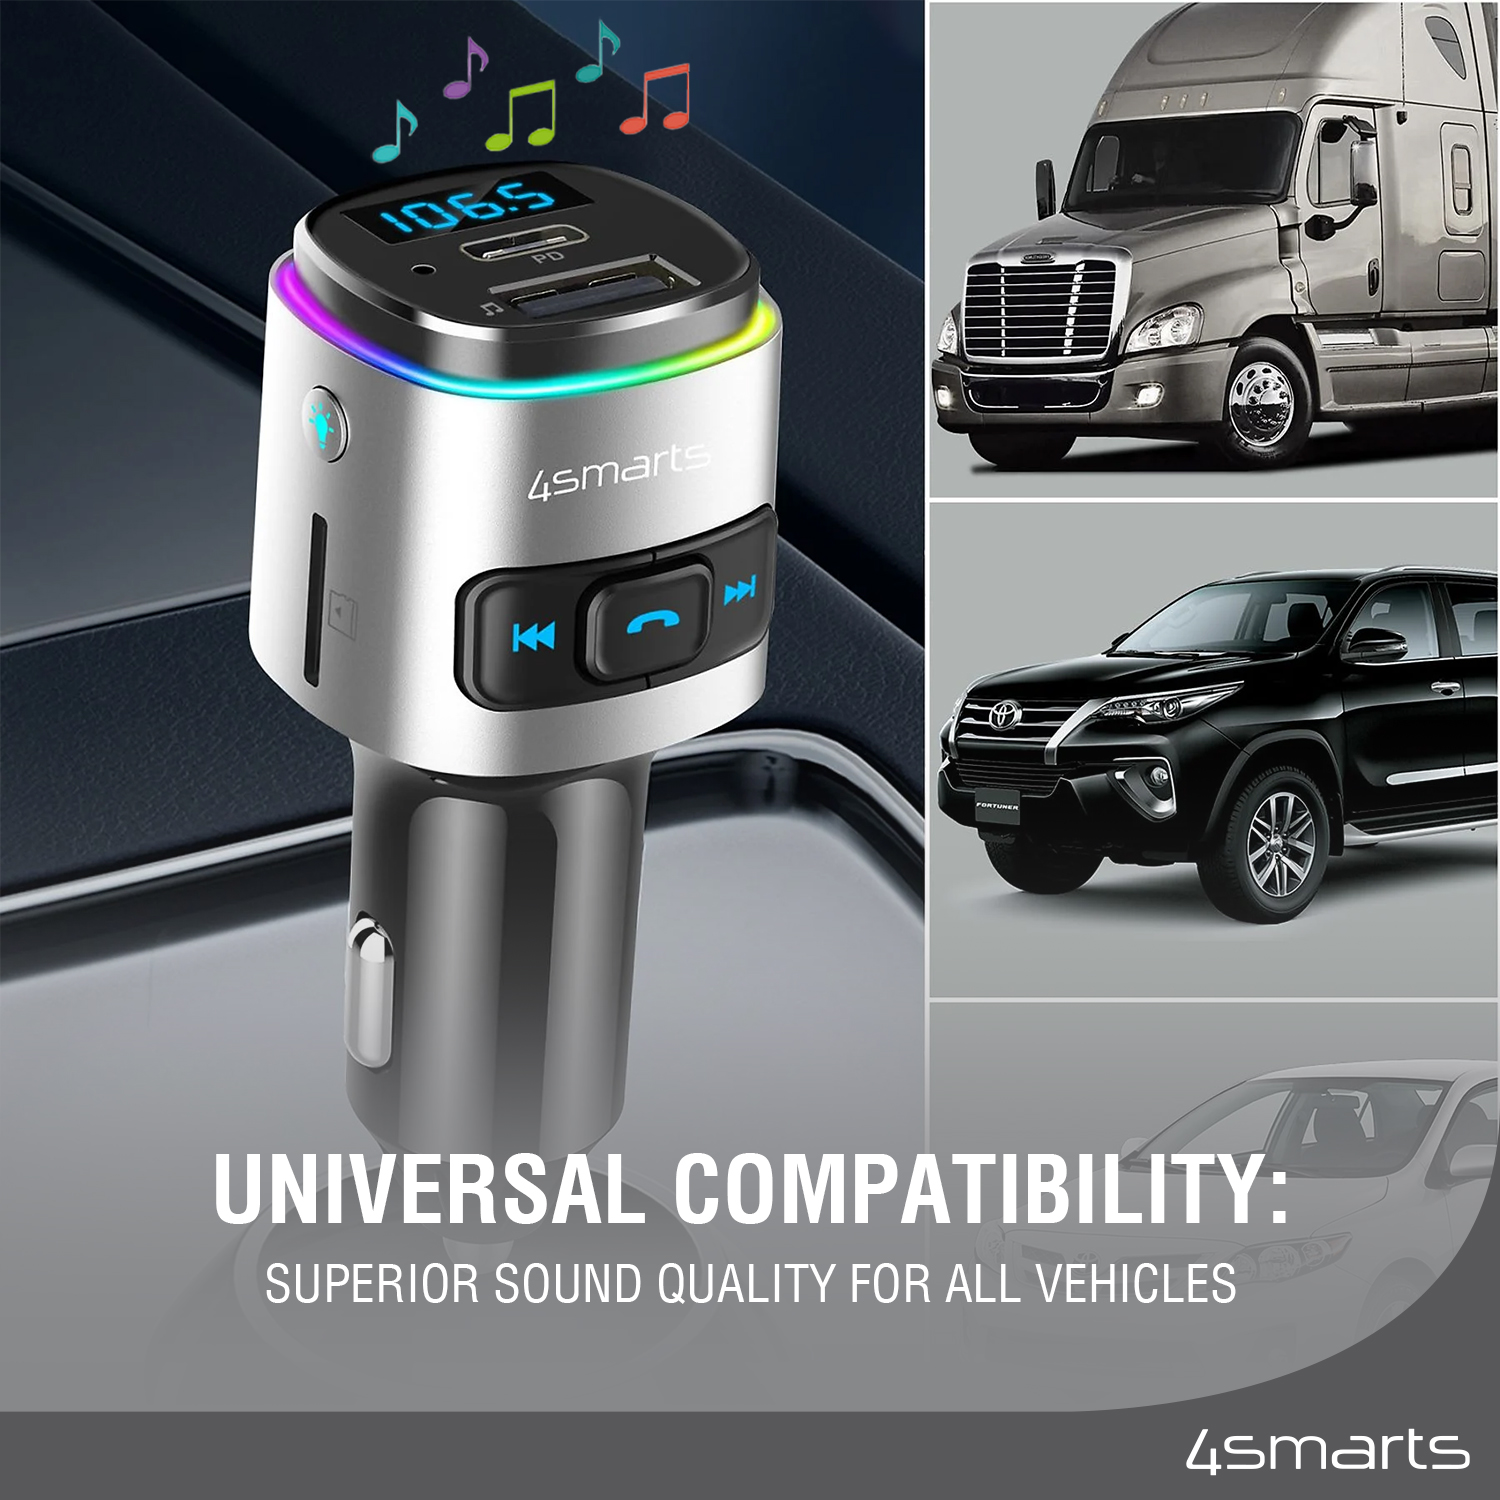 The 4smarts Bluetooth Transmitter Media&Assist 2 offers premium sound transmission and is compatible with most cell phones, car radios and cars.